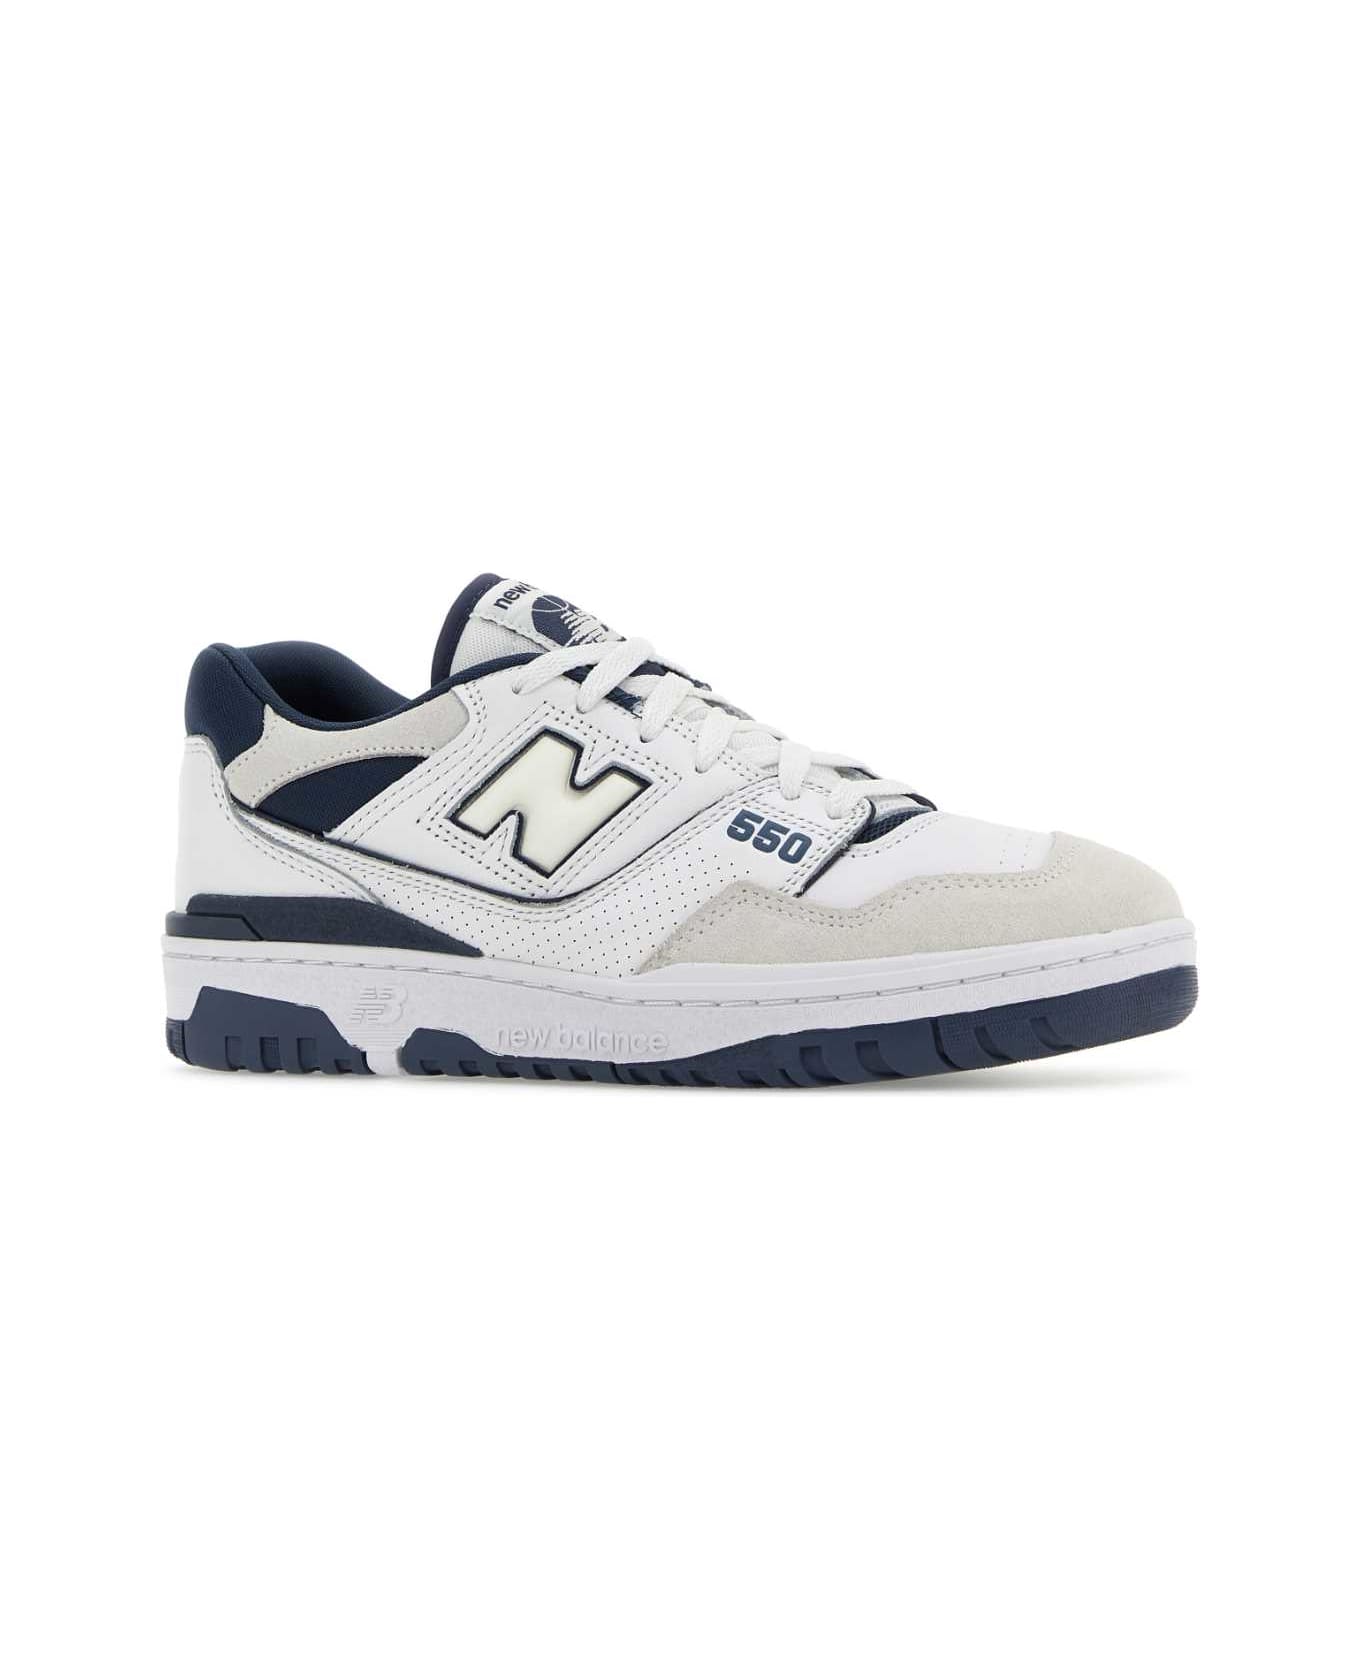 New Balance Two-tones Leather And Fabric 550 Sneakers - WHITE